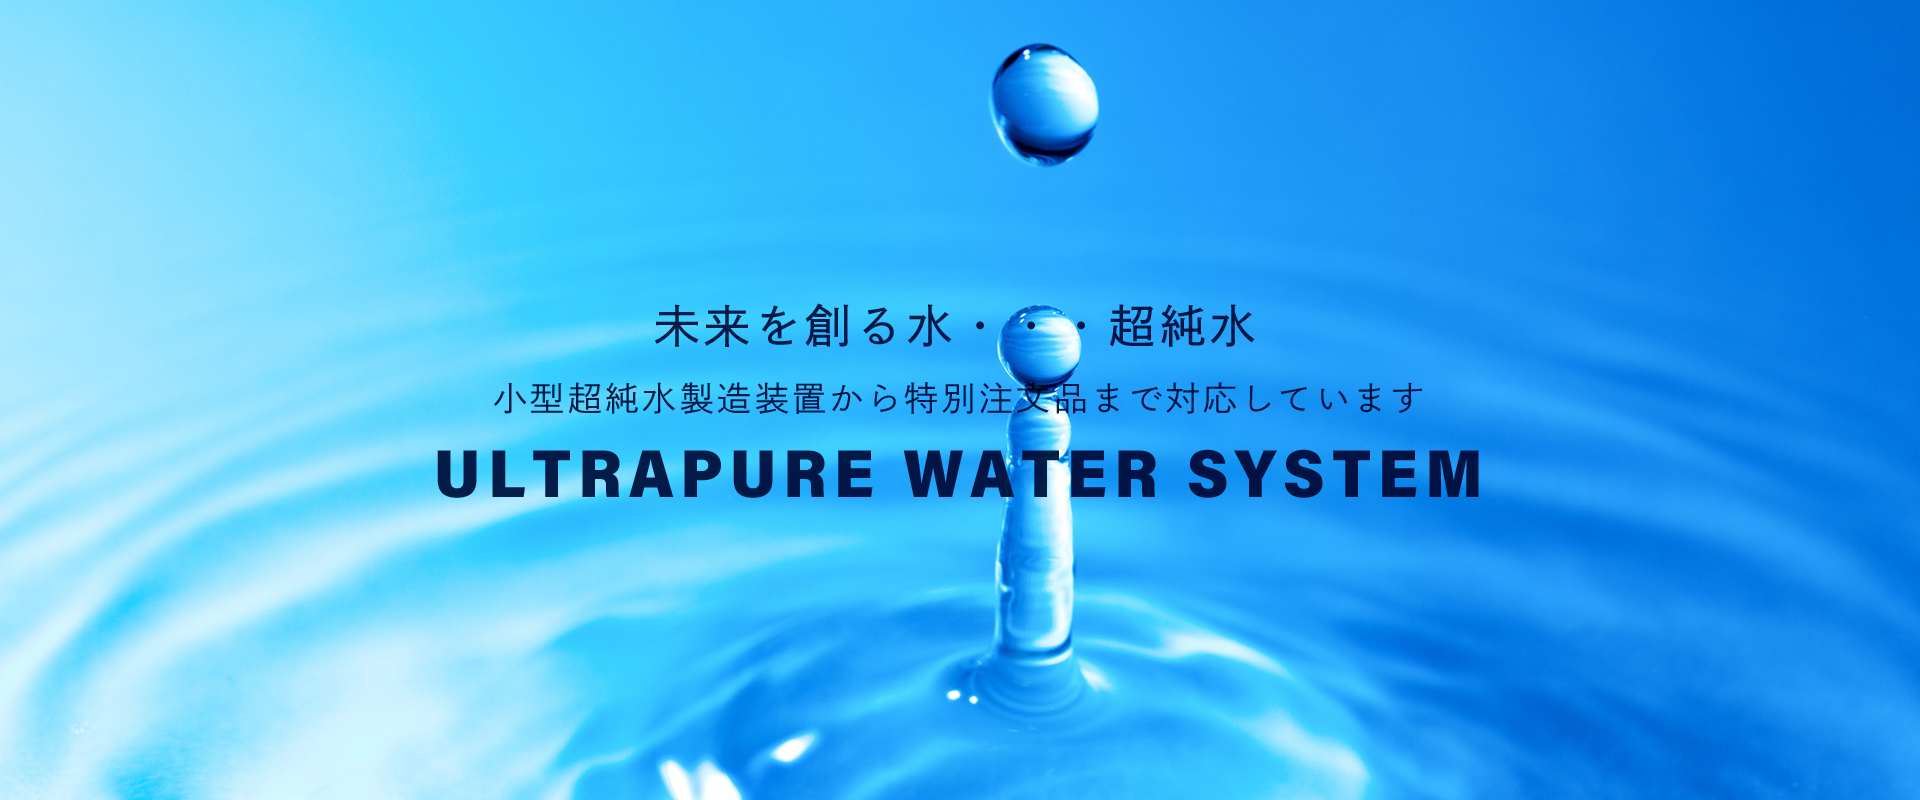 ULTRAPURE WATER SYSTEM